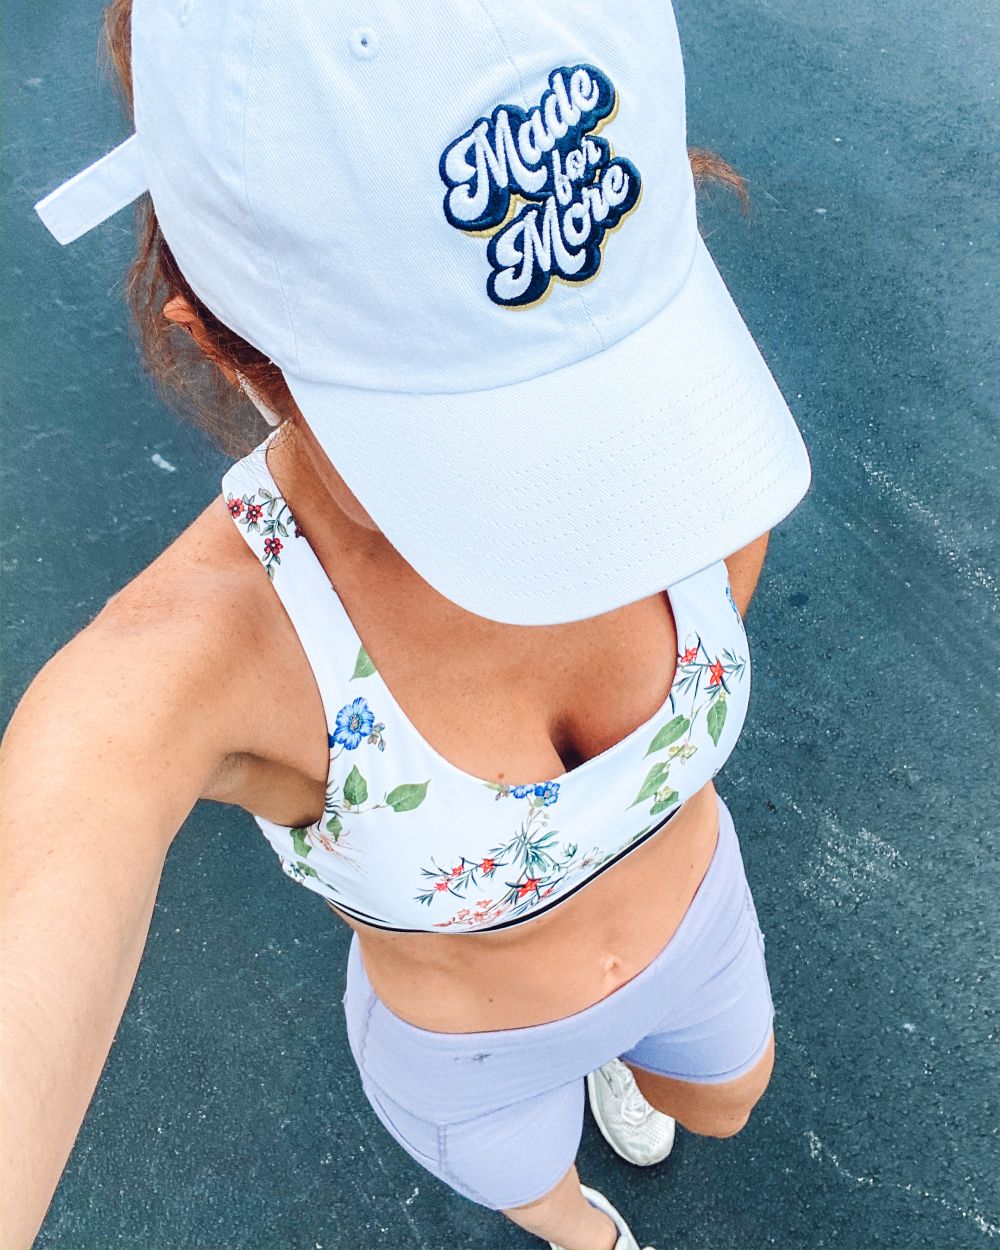 Home Workout Equipment Ideas by popular Florida lifestyle blog, The Modern Savvy: image of a woman wearing a white ball cap, floral bralette, white sneakers, and purple bike shorts. 